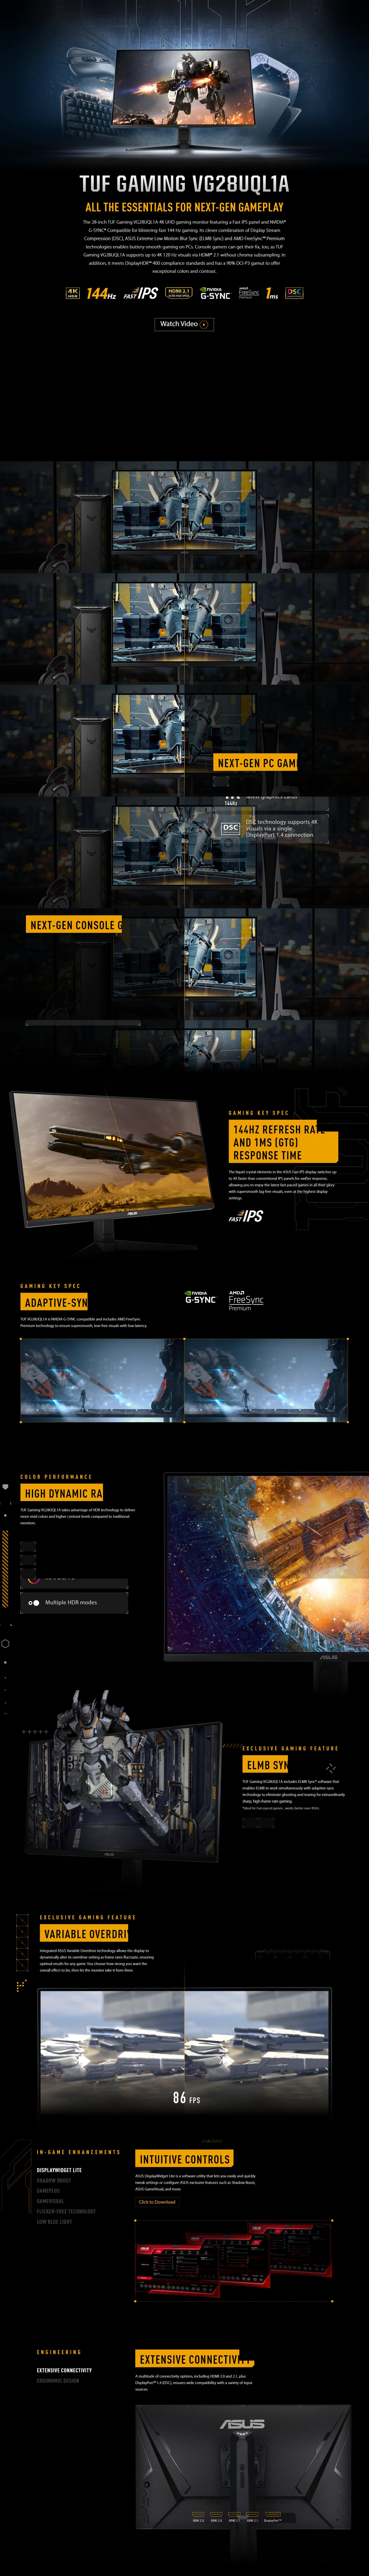 ASUS TUF Gaming 28” 4K 144HZ DSC HDMI 2.1, Monitor (VG28UQL1A) - UHD (3840  x 2160), Fast IPS, 1ms, Extreme Low Motion Blur Sync, G-SYNC Compatible